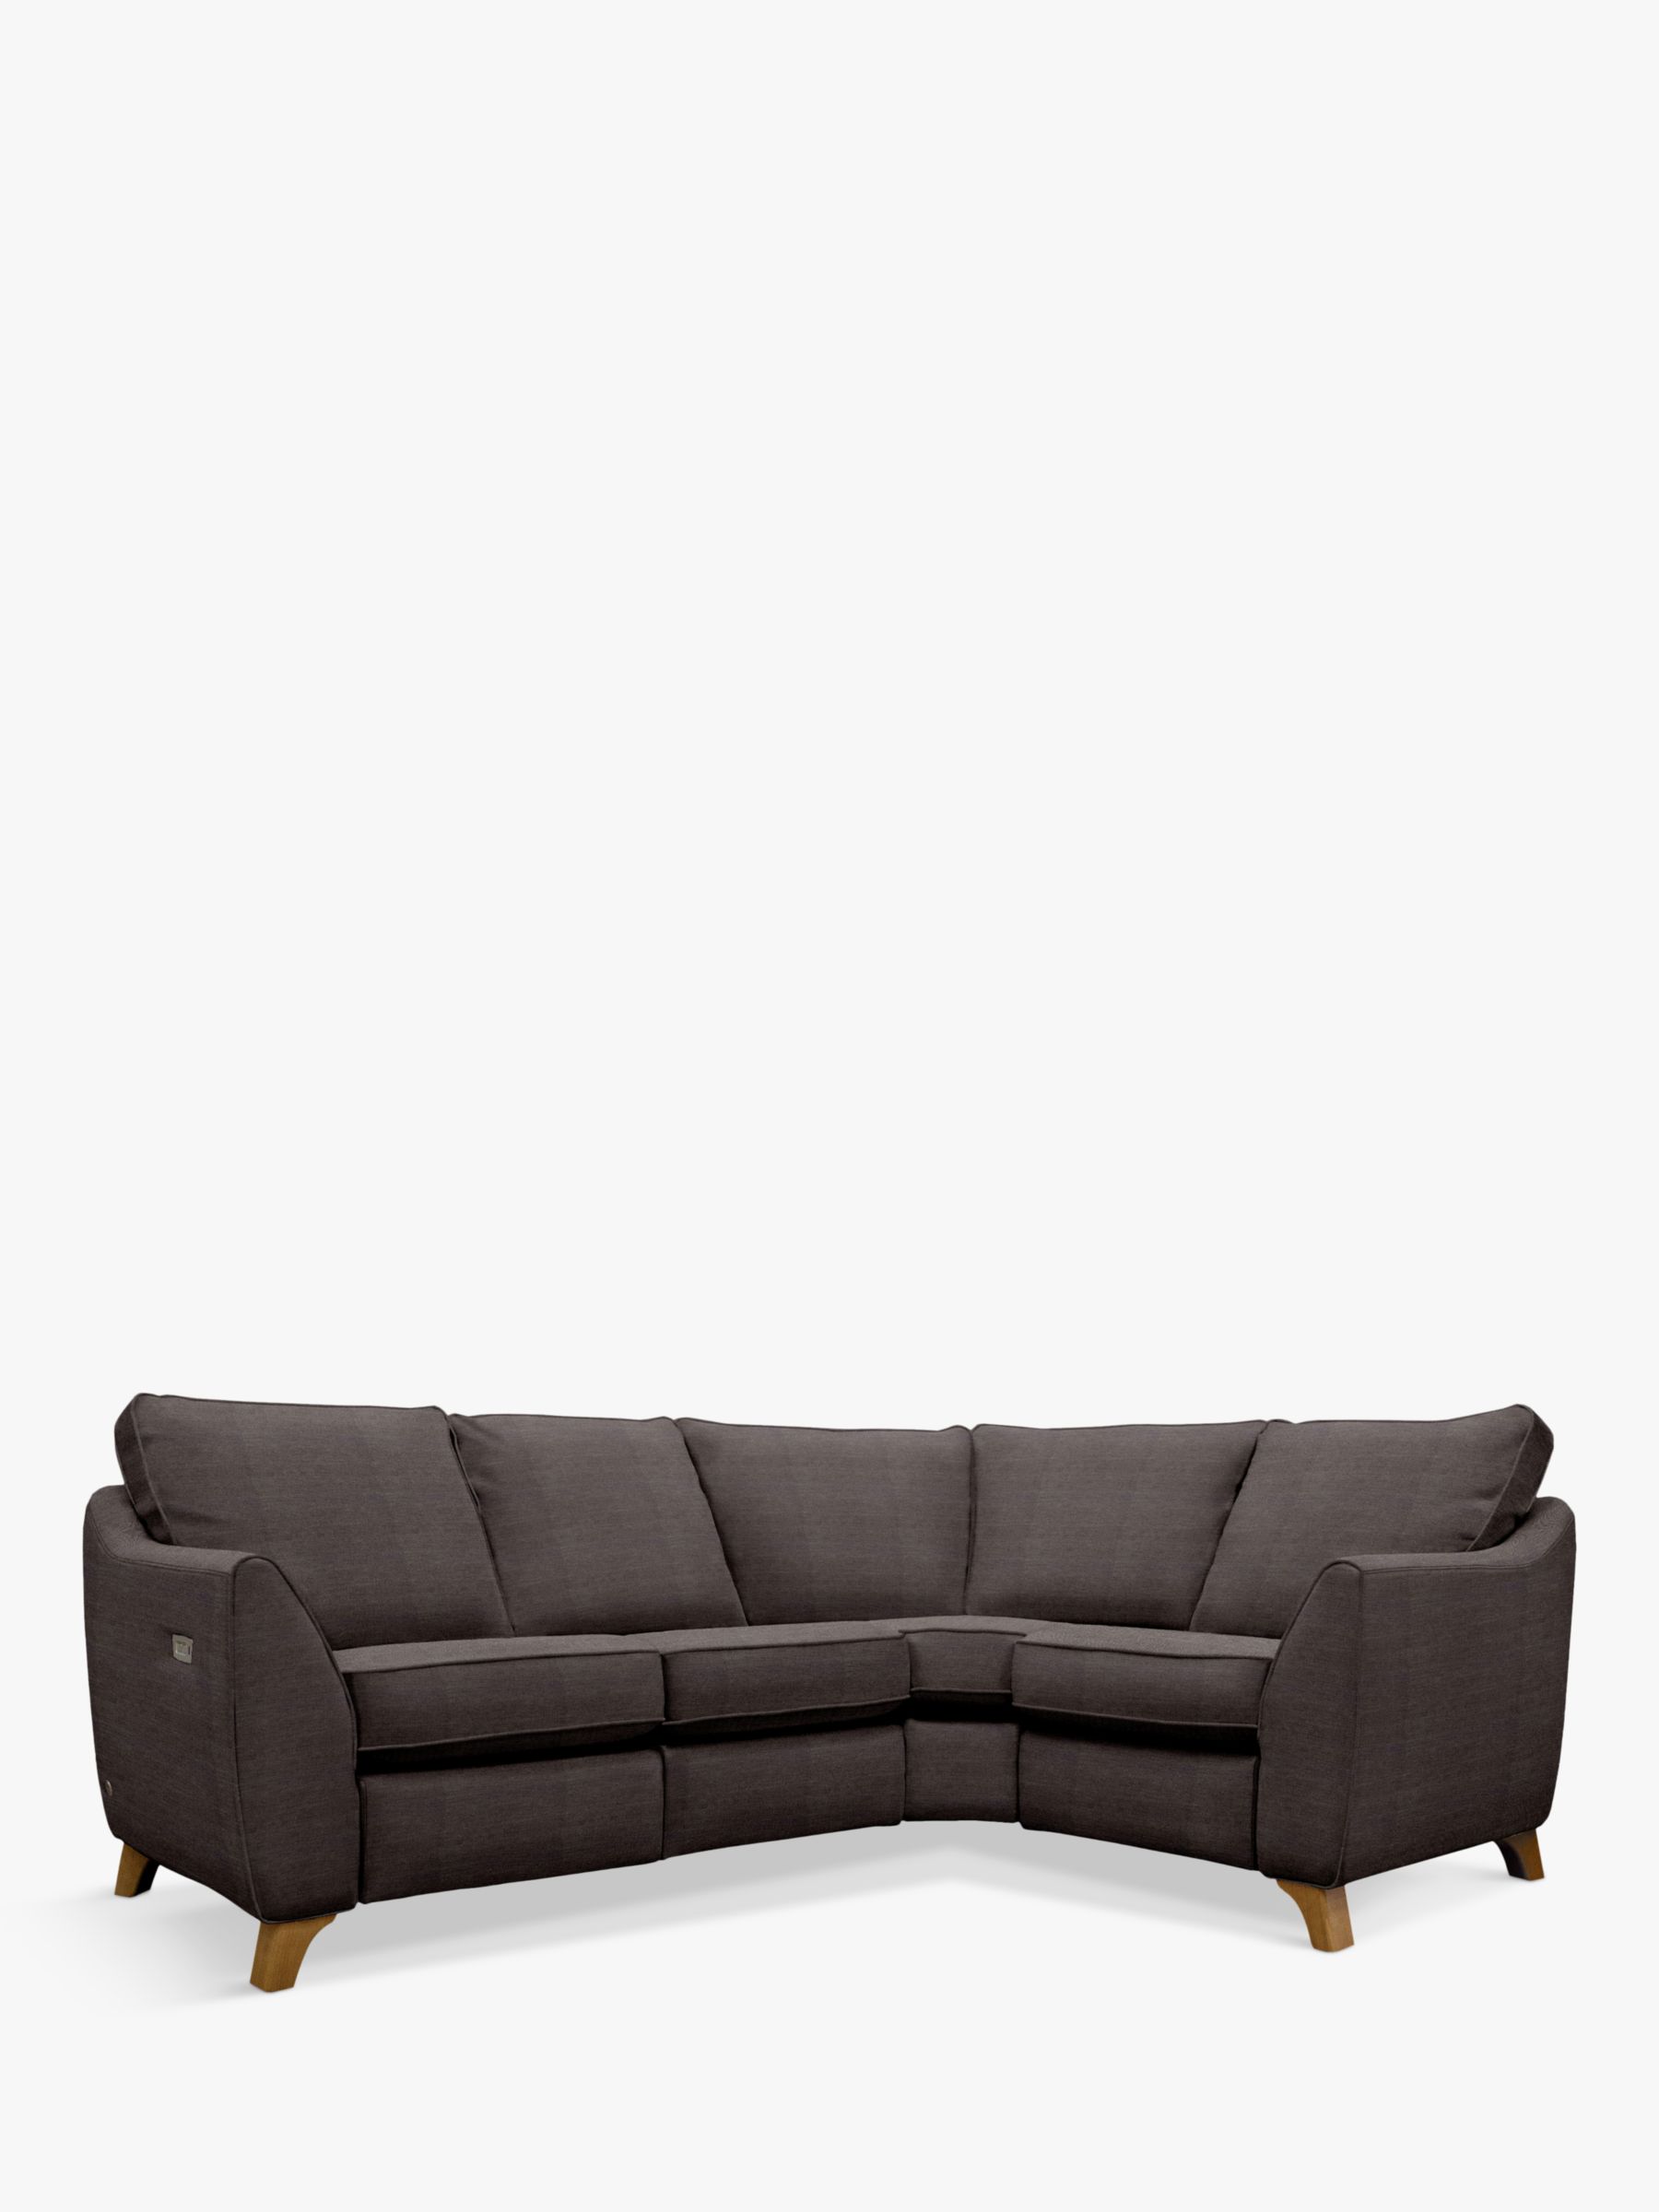 The Sixty Eight Range, G Plan Vintage The Sixty Eight RHF 5+ Seater Corner Sofa, Tonic Charcoal